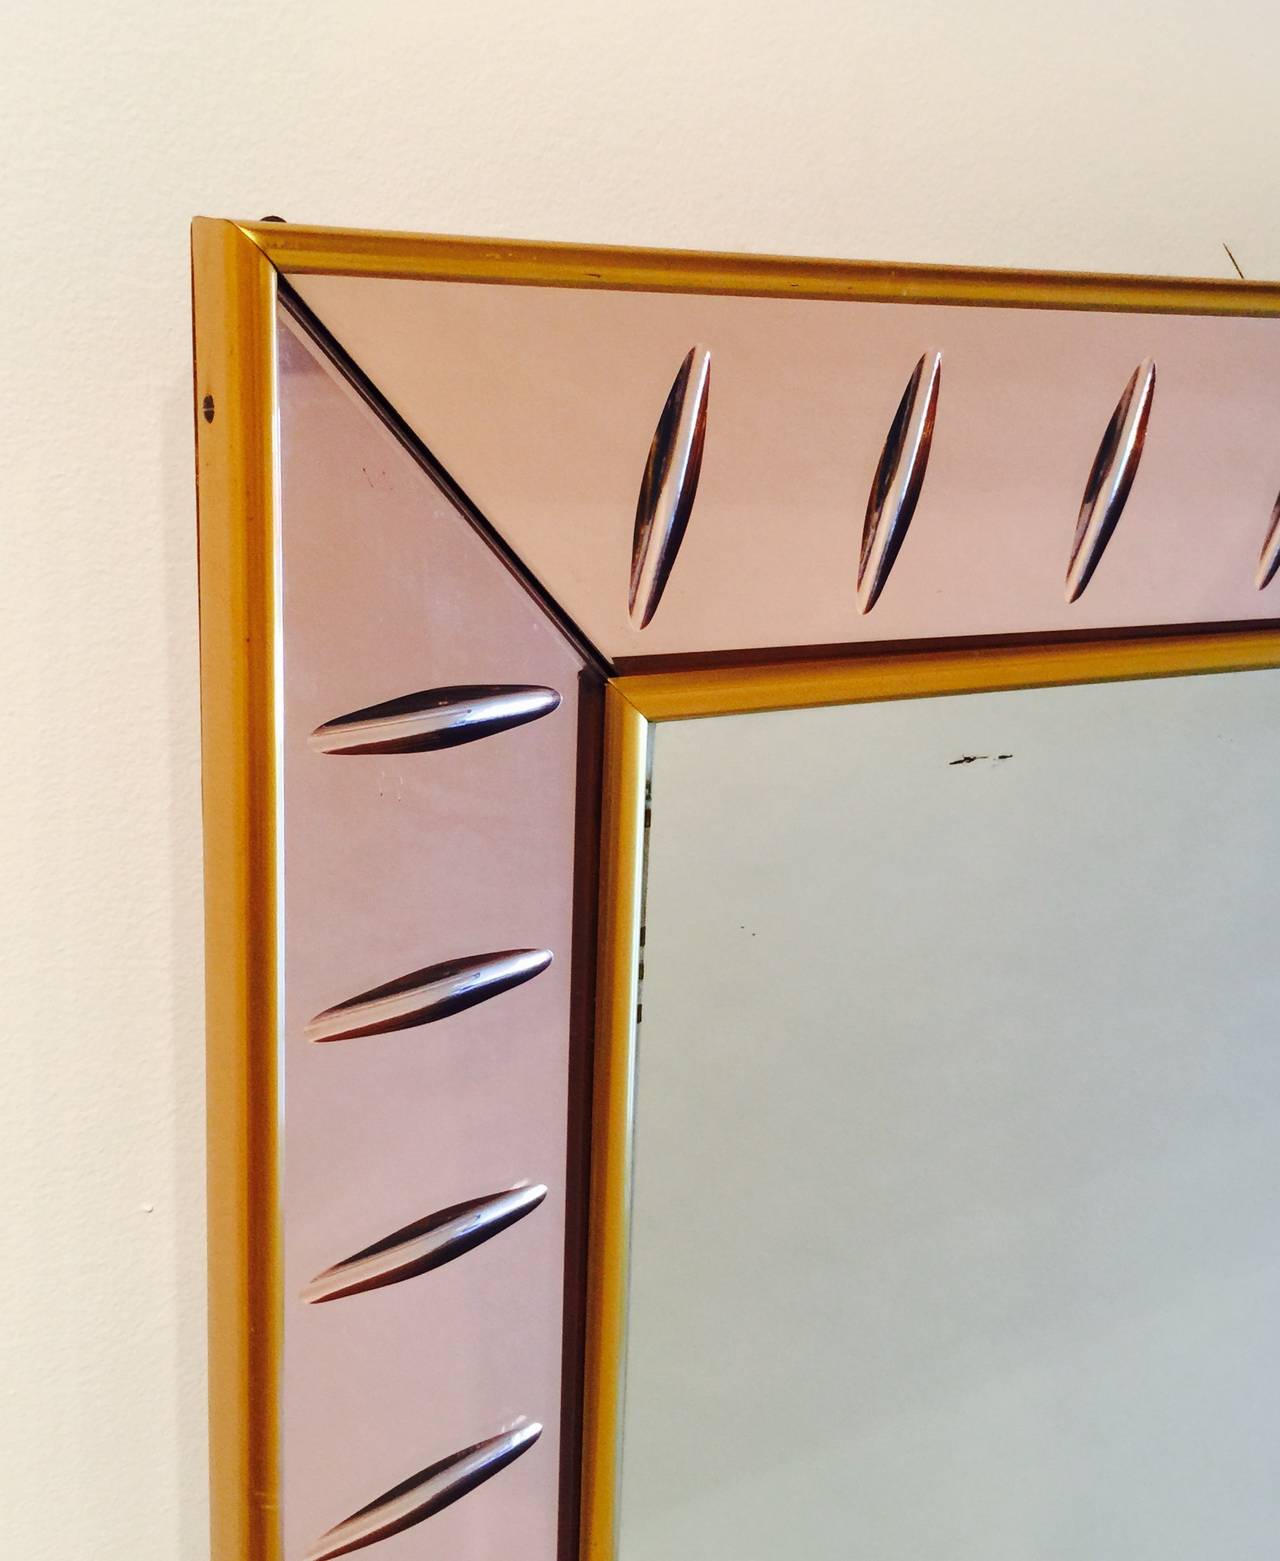 A Large Mirror With An Integrated Glass Shelf Framed In Rose Colored Mirror Resting On Wooden Feet By Cristal Art